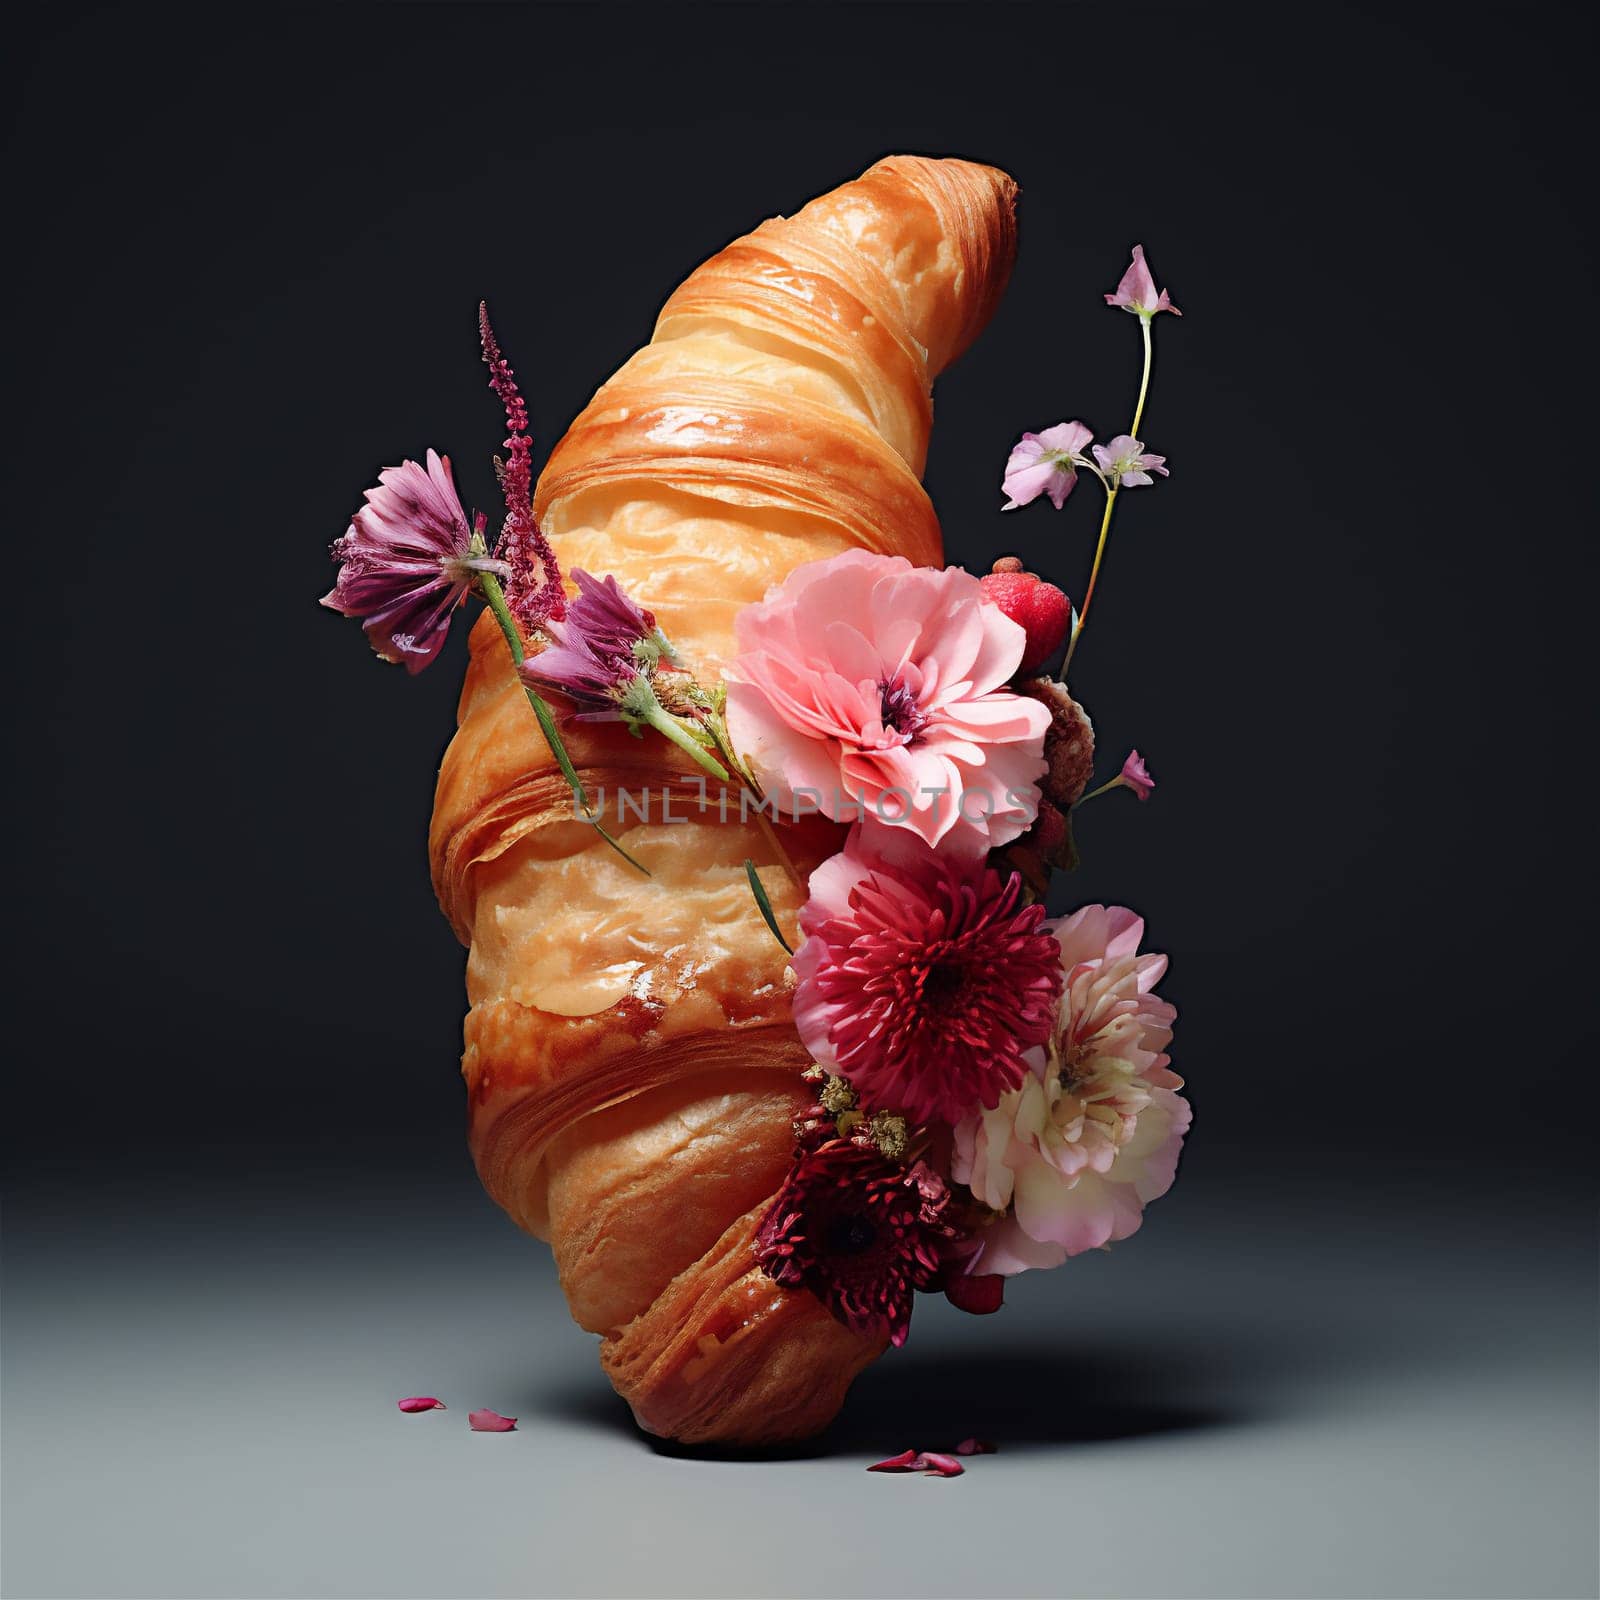 Delicious croissant with beautiful flowers on black background by IrynaMelnyk